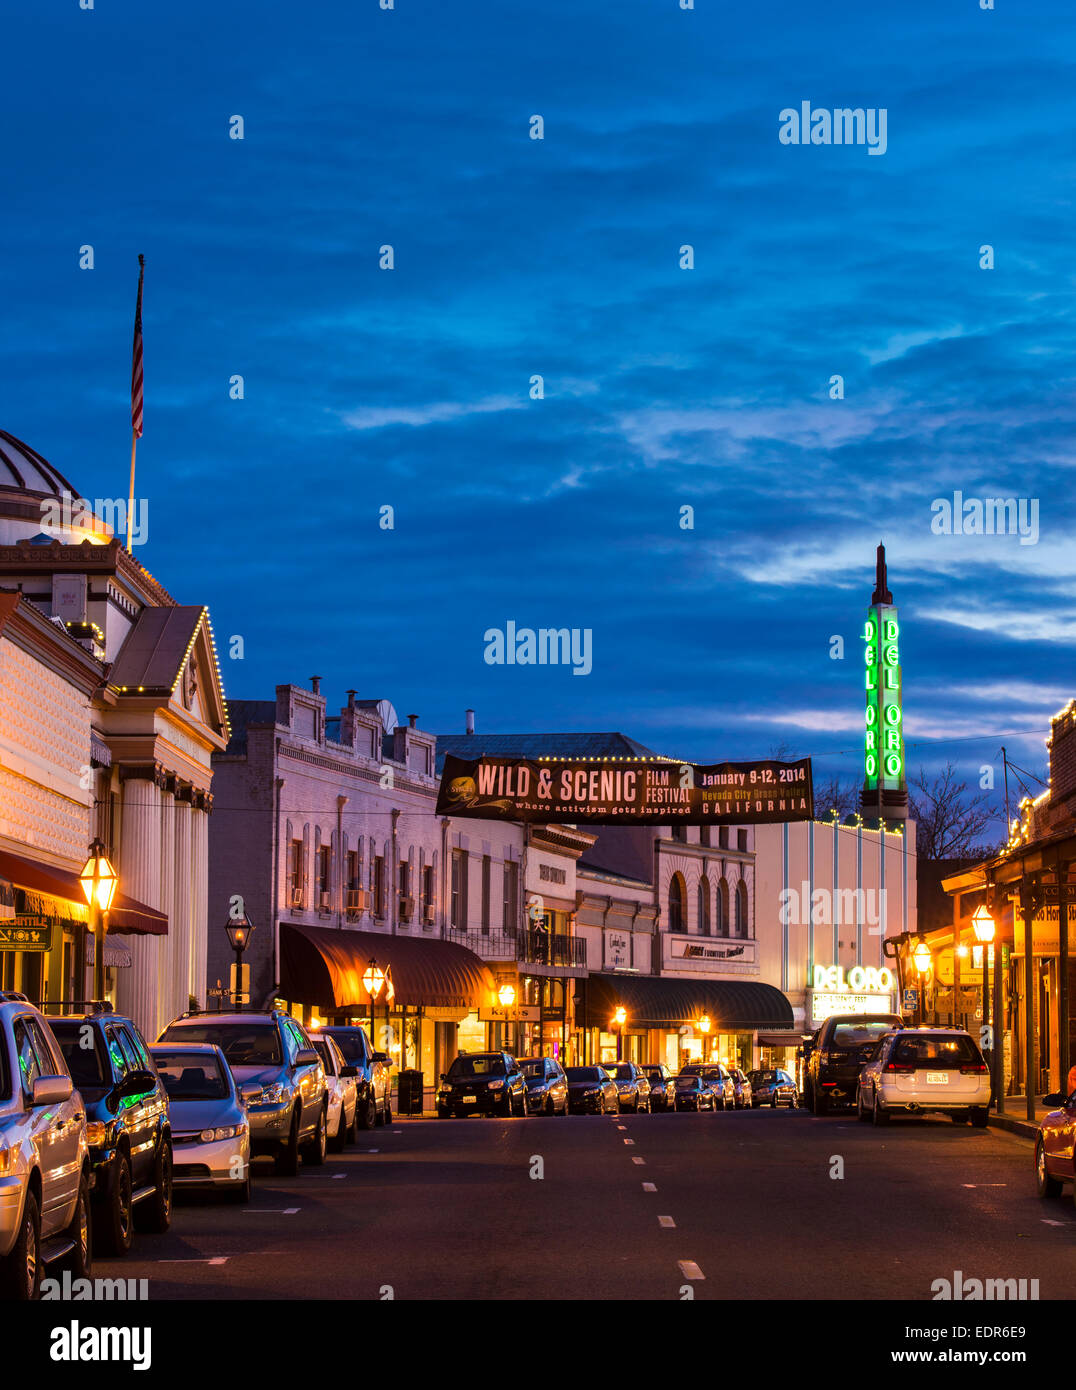 Historic gold rush town Grass Valley and historic Del Oro movie theater at dusk, Grass Valley, California Stock Photo